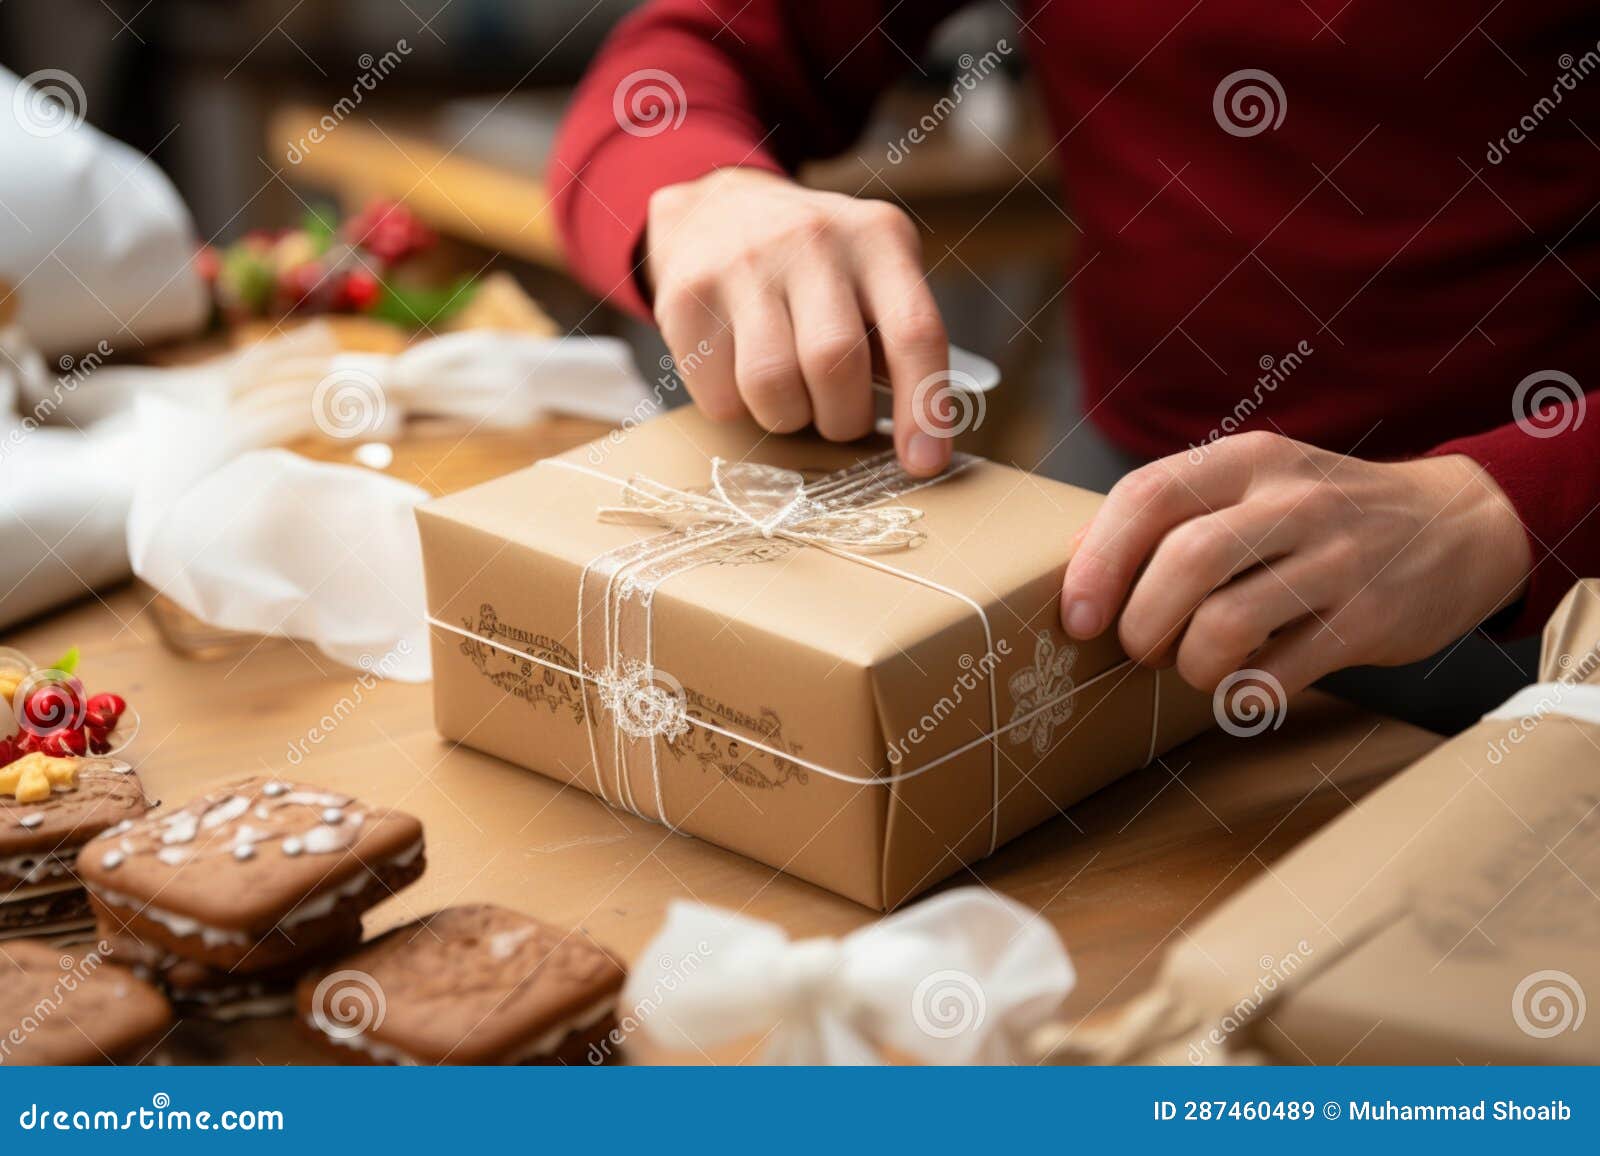 pastry packaging: confectioner's hands expertly encase cardboard box in close-up, showcasing skilled artistry.